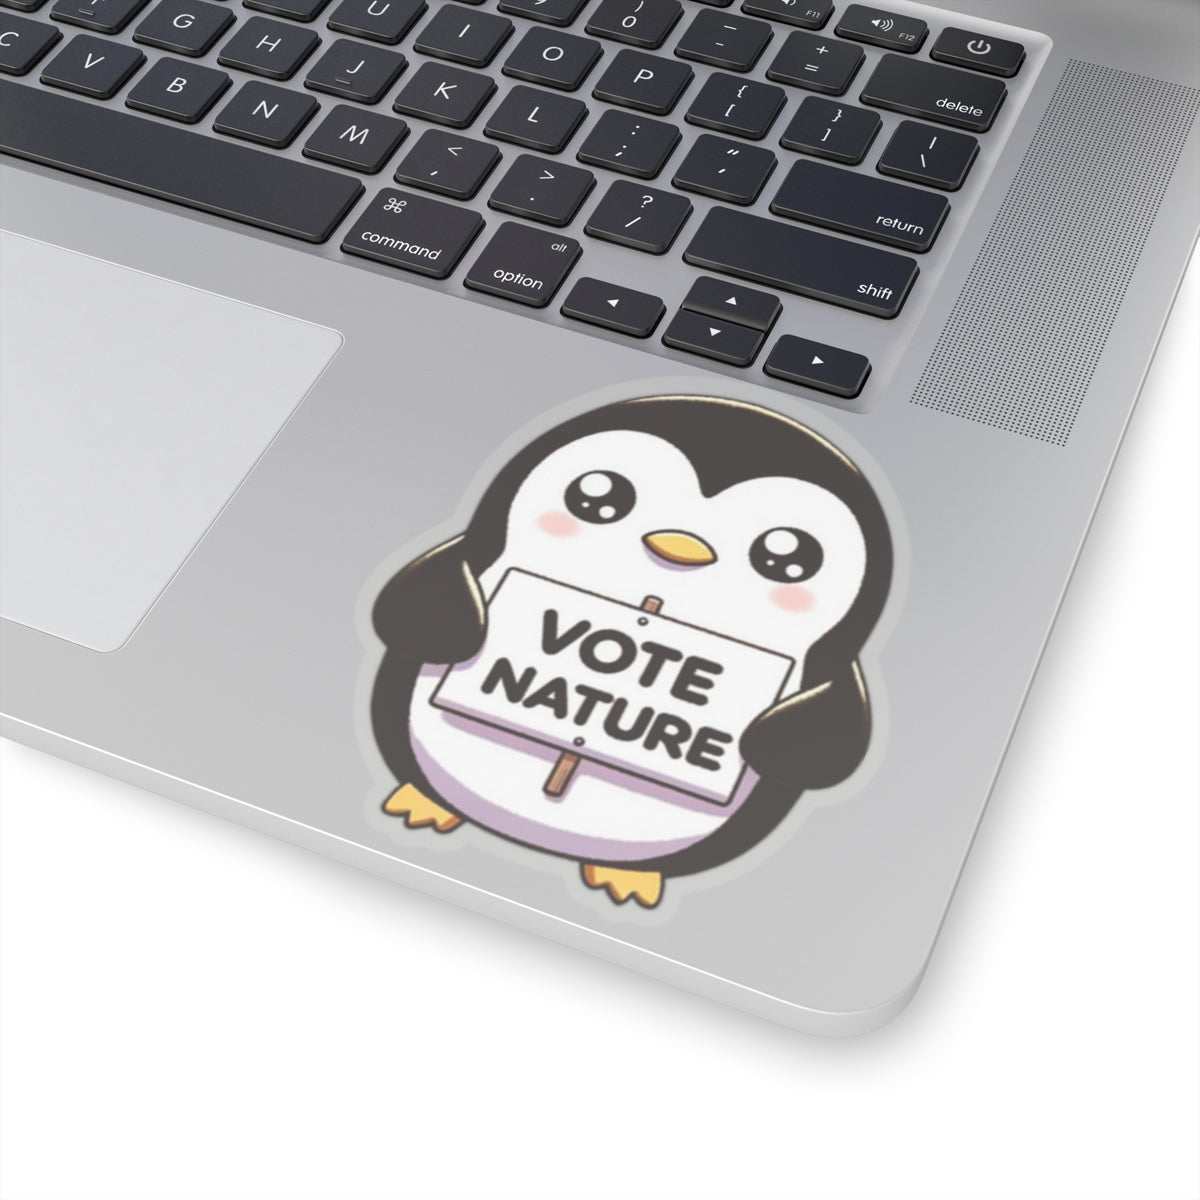 Inspirational Cute Penguin Statement vinyl Sticker: Vote Nature! for laptop, kindle, phone, ipad, instrument case, notebook, mood board